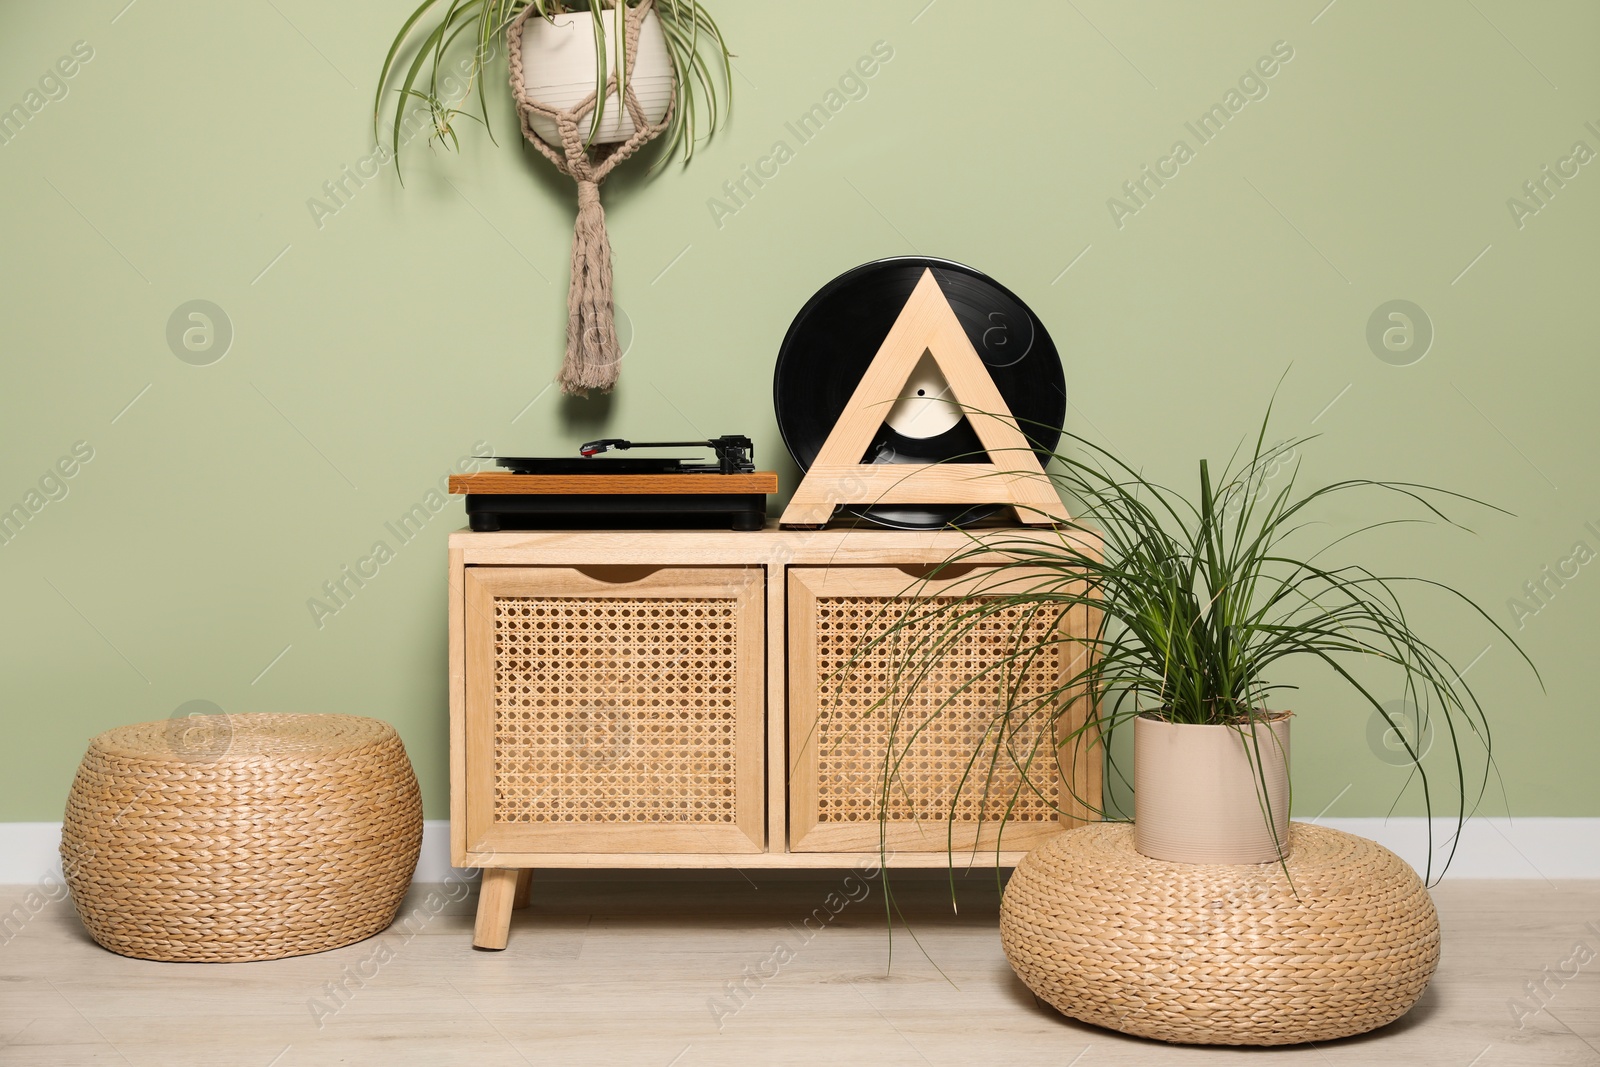 Photo of Living room interior with vinyl records and player